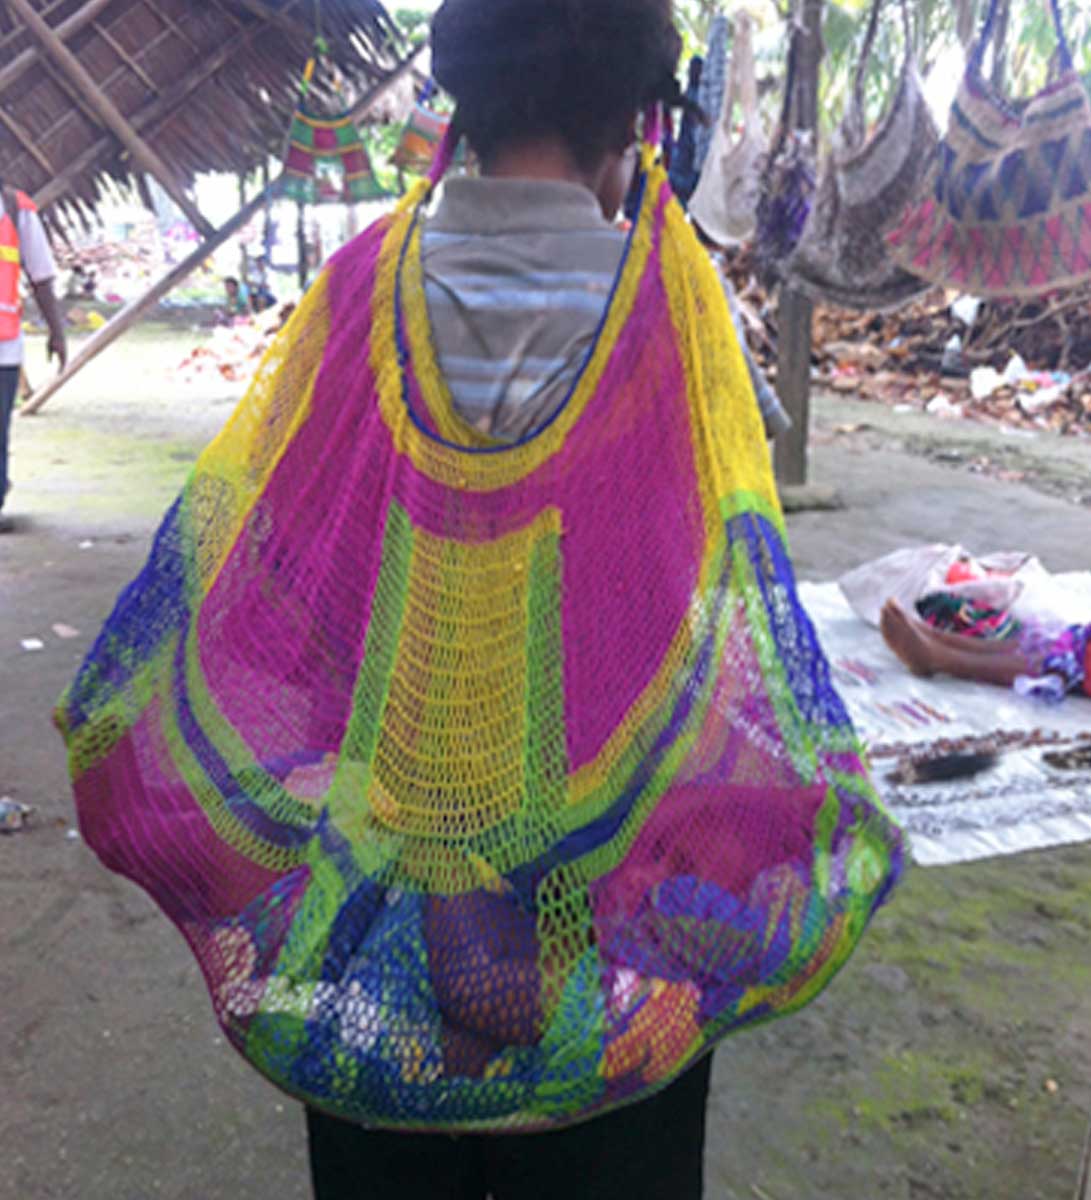 Papua New Guinean woman carrying a baby in a bilum on her head at the markets.